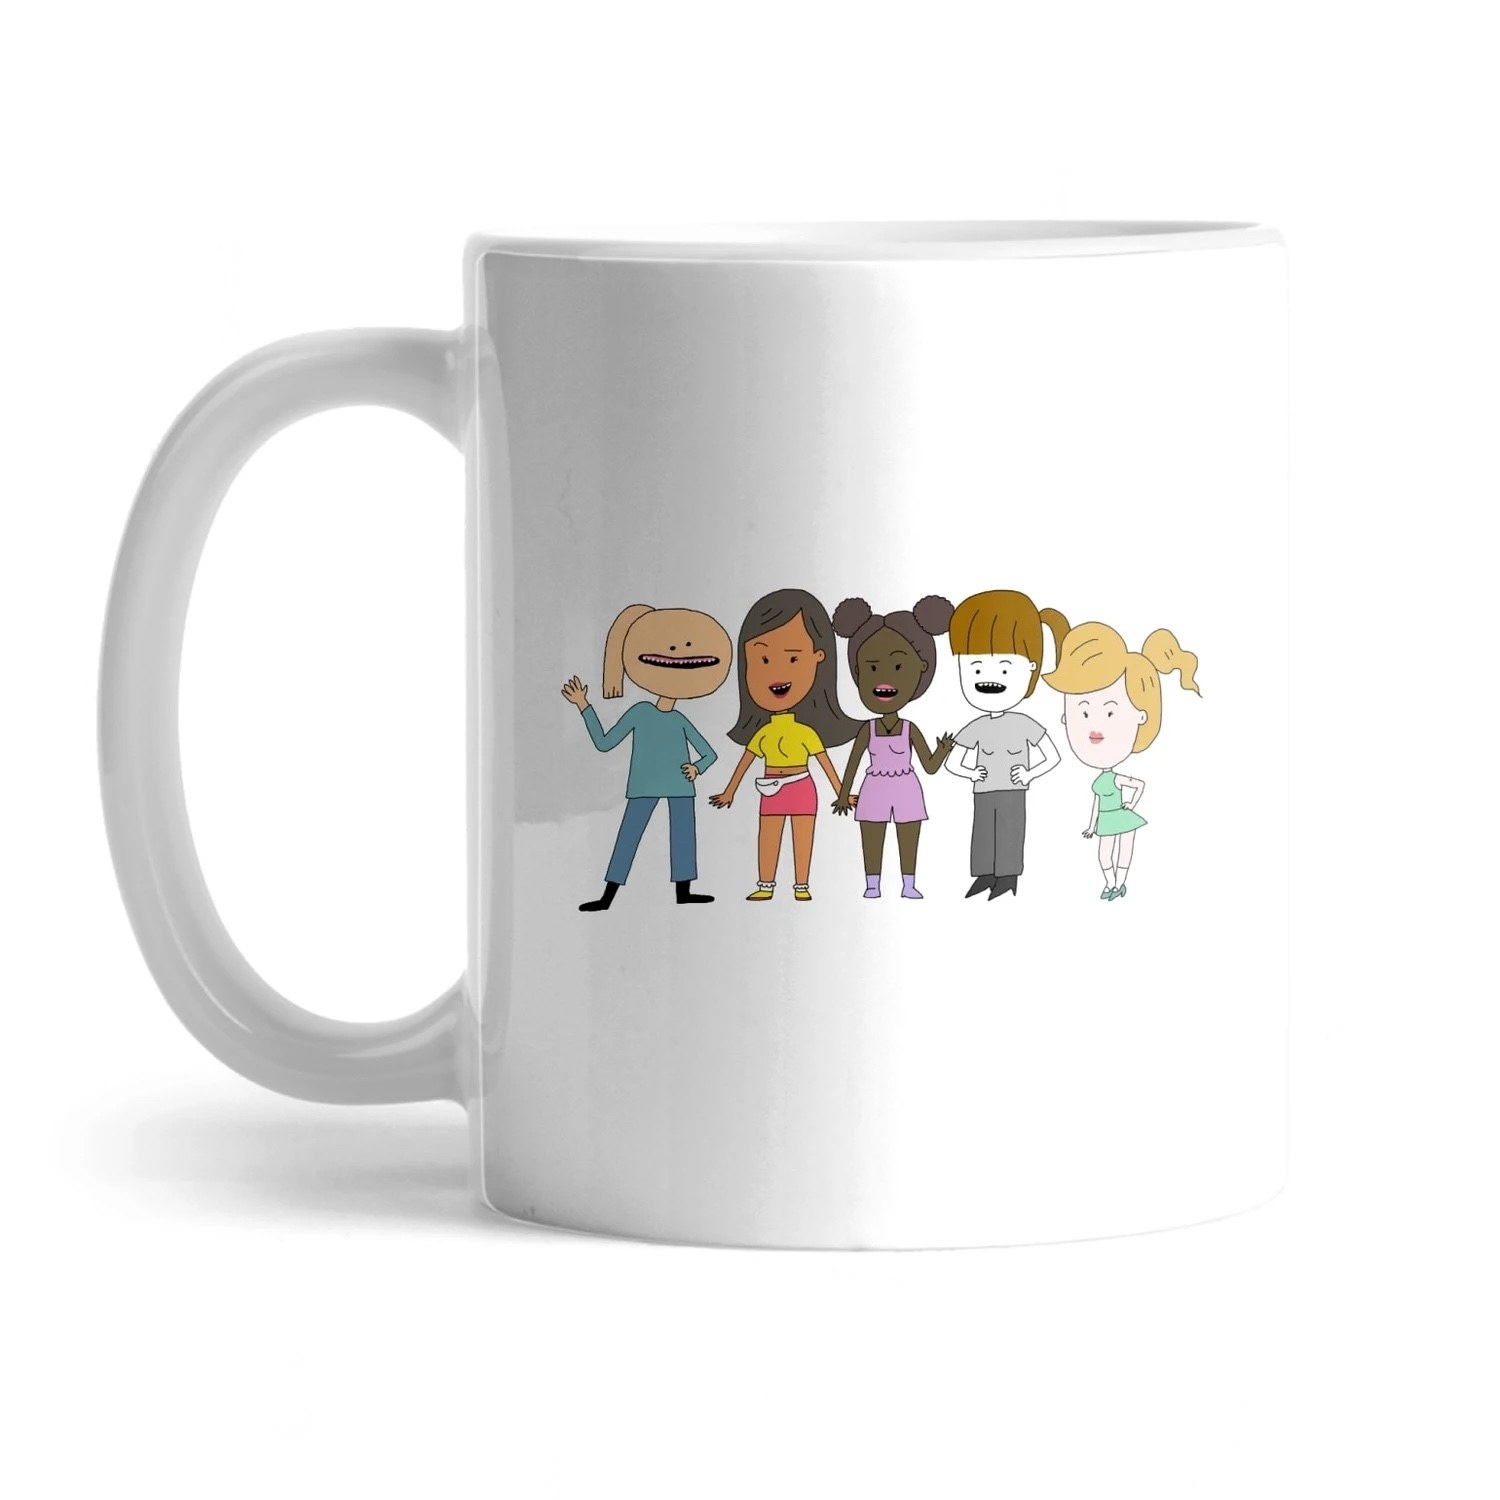 a mug with Helga and her four friends across the front